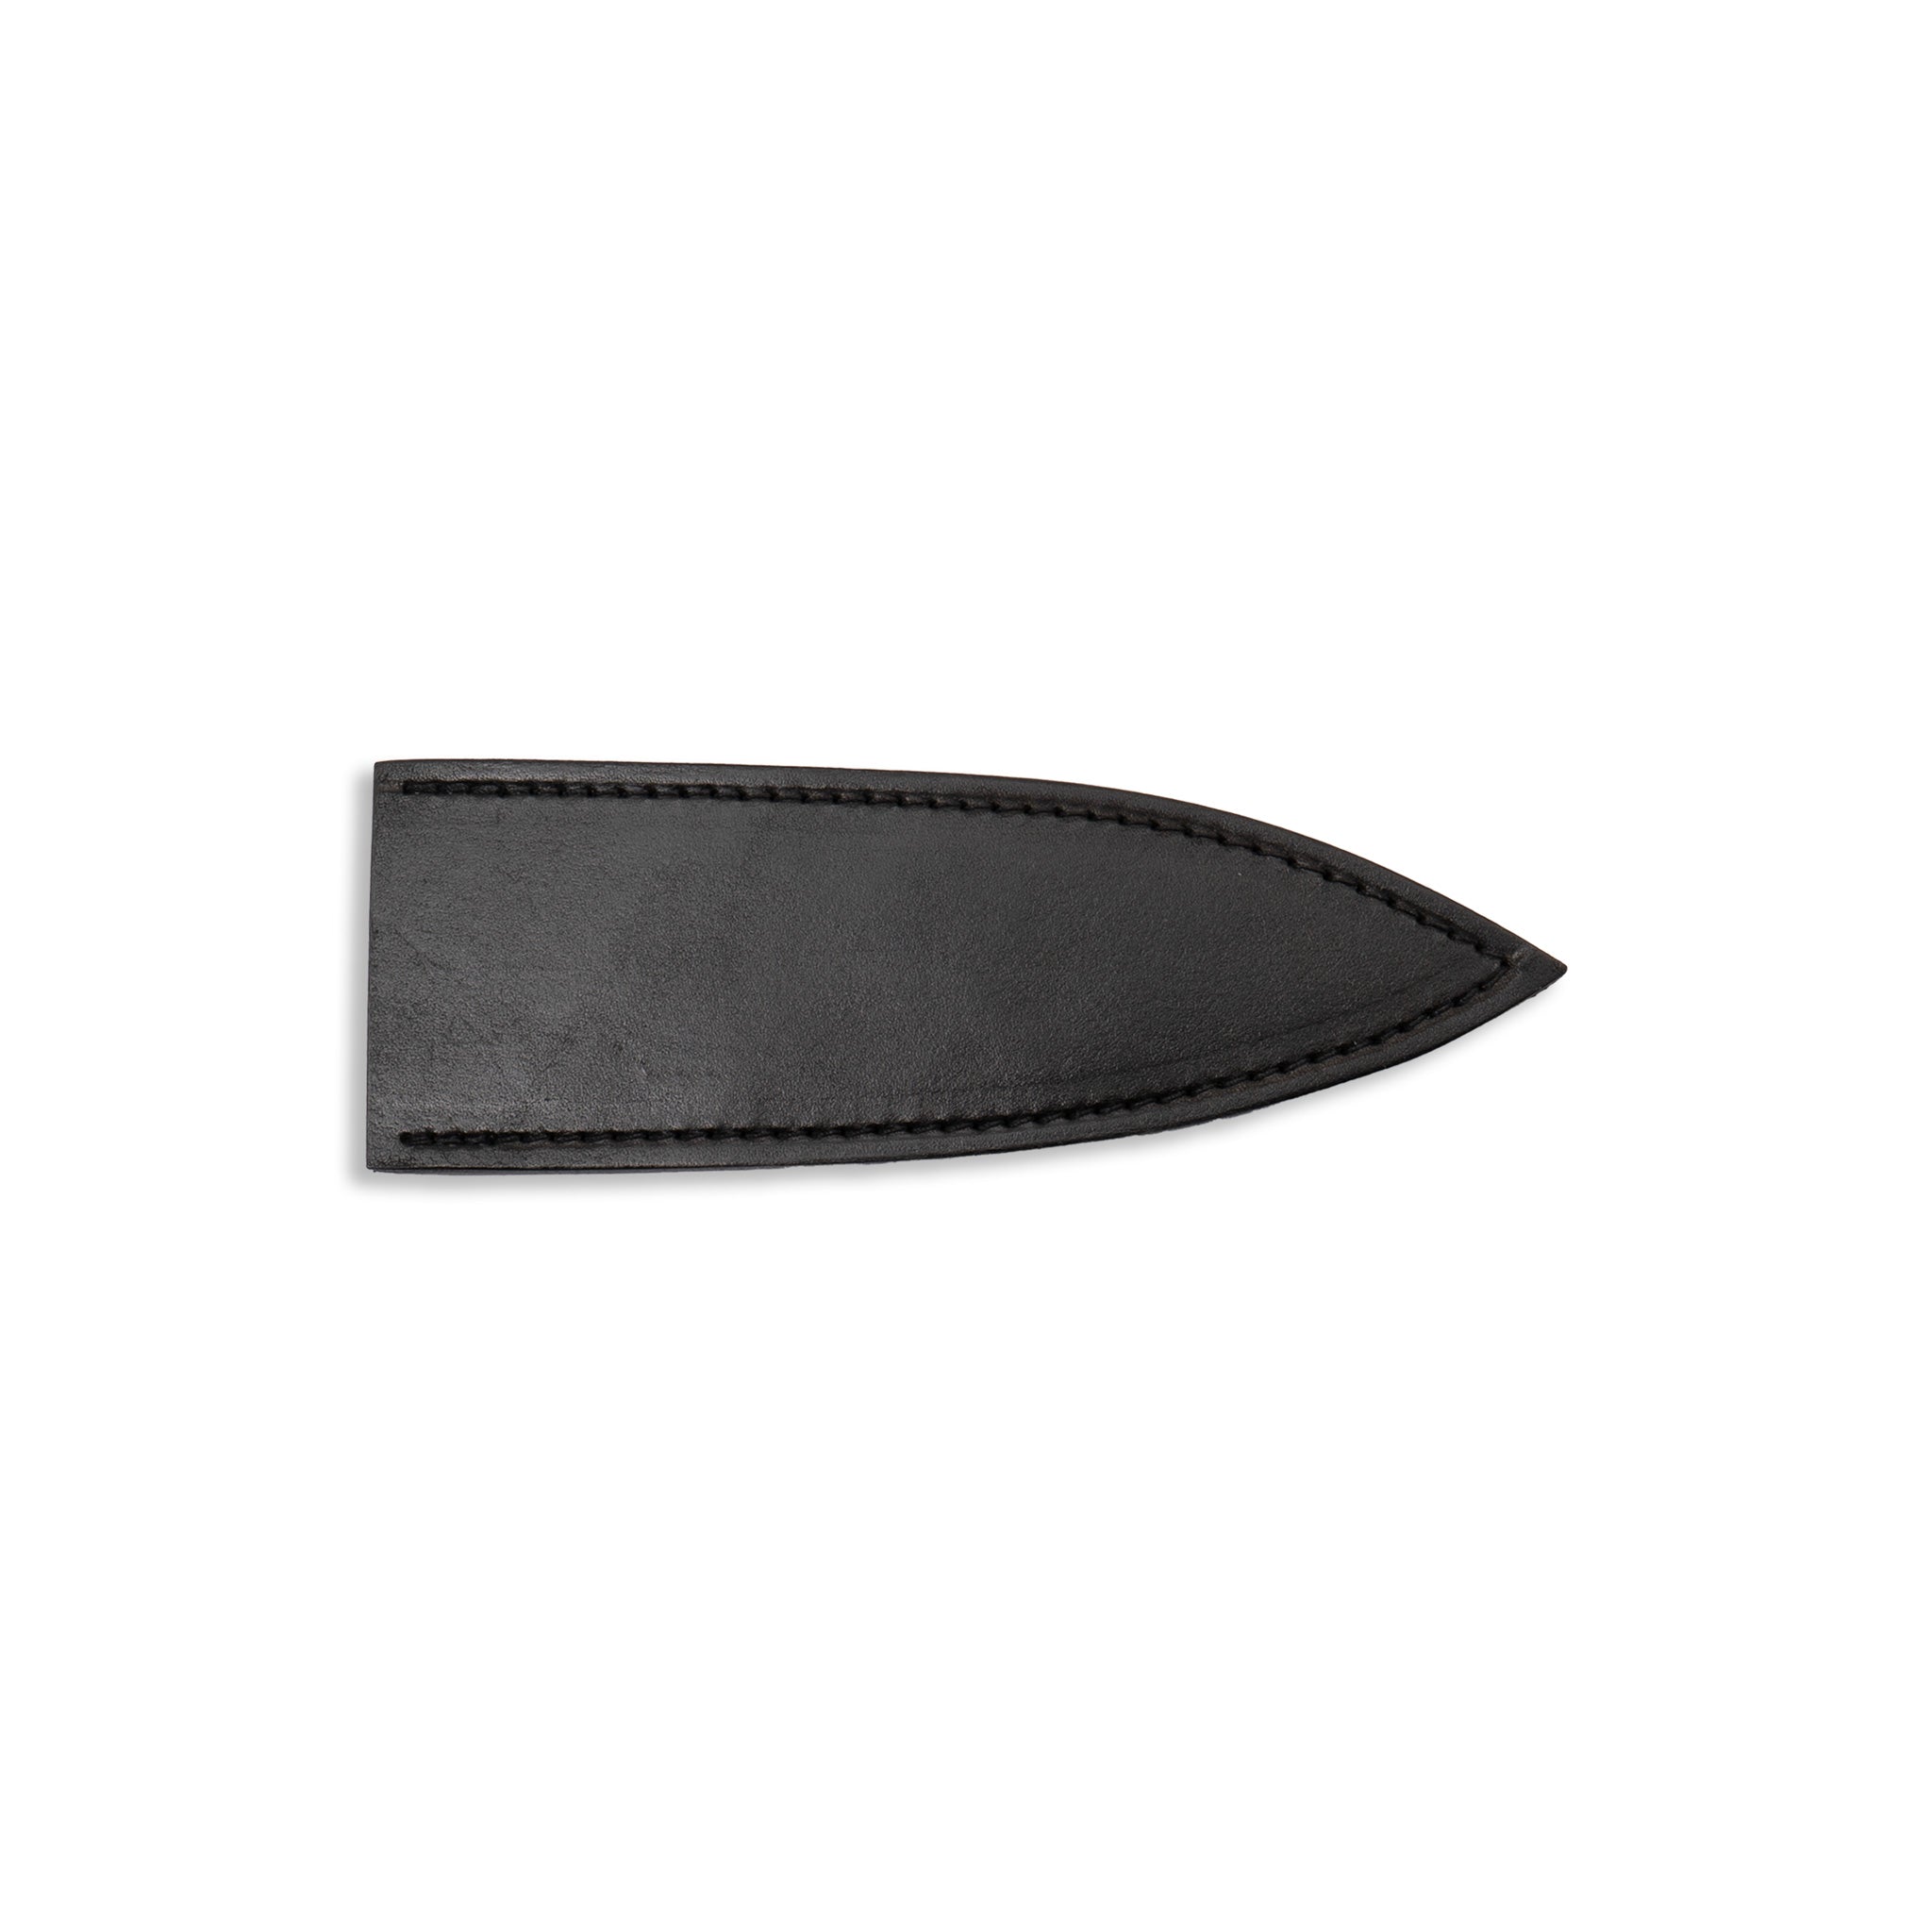 Town Cutler black leather scabbard knife blade cover for kitchen utility knife.